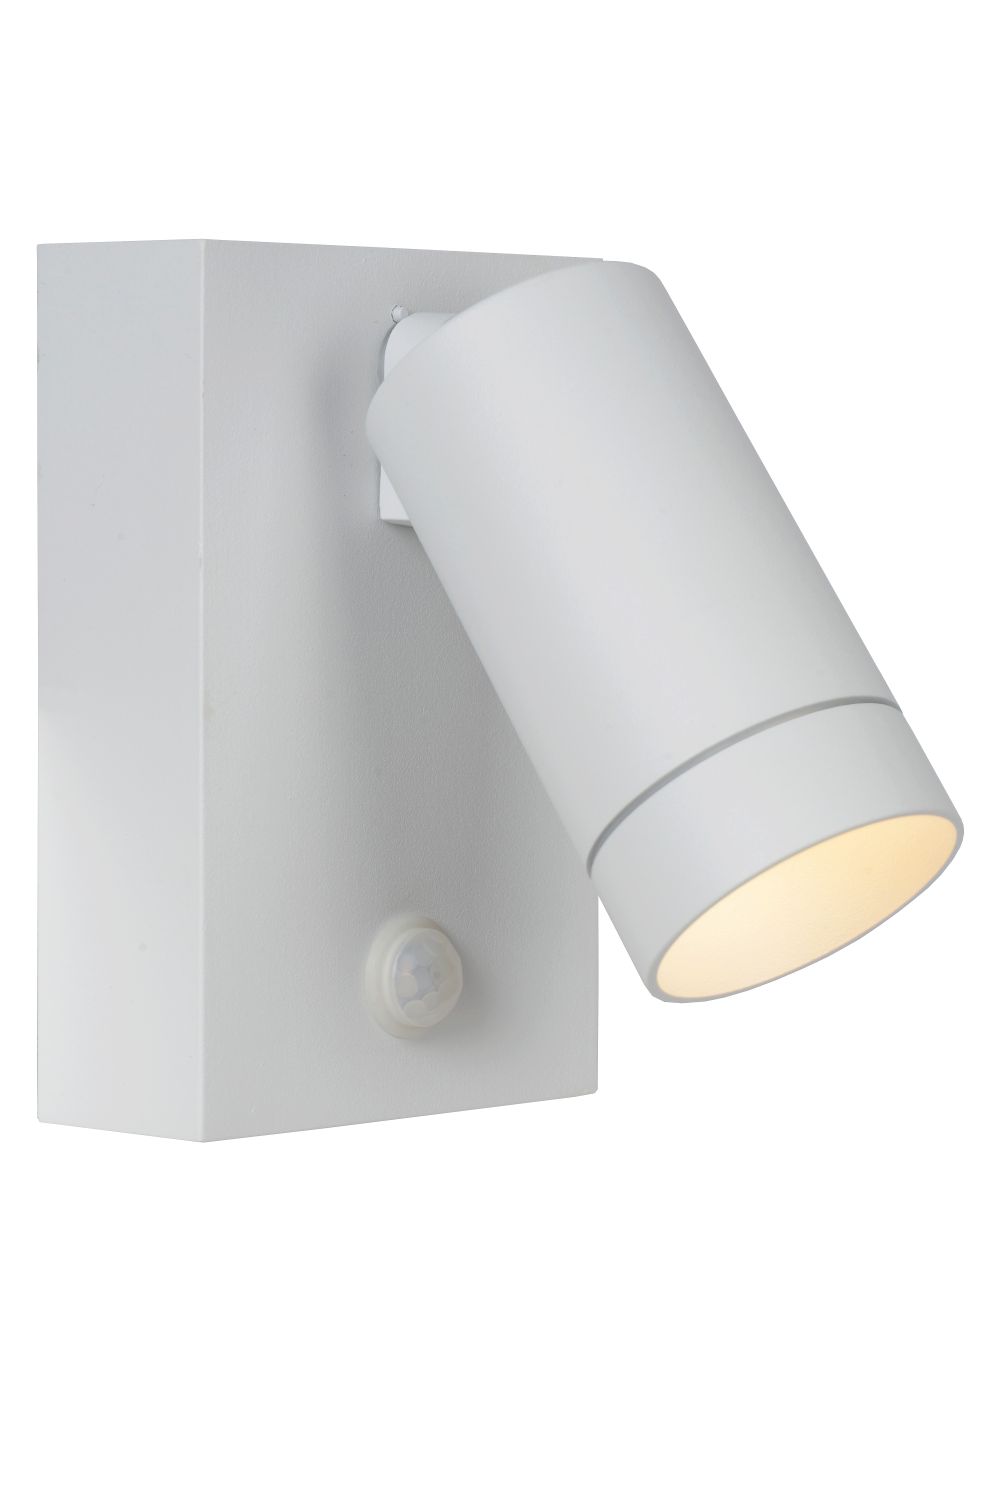 Outdoor wall lamp Lucide TAYLOR, 1xGU10, IP54, motion sensor, white